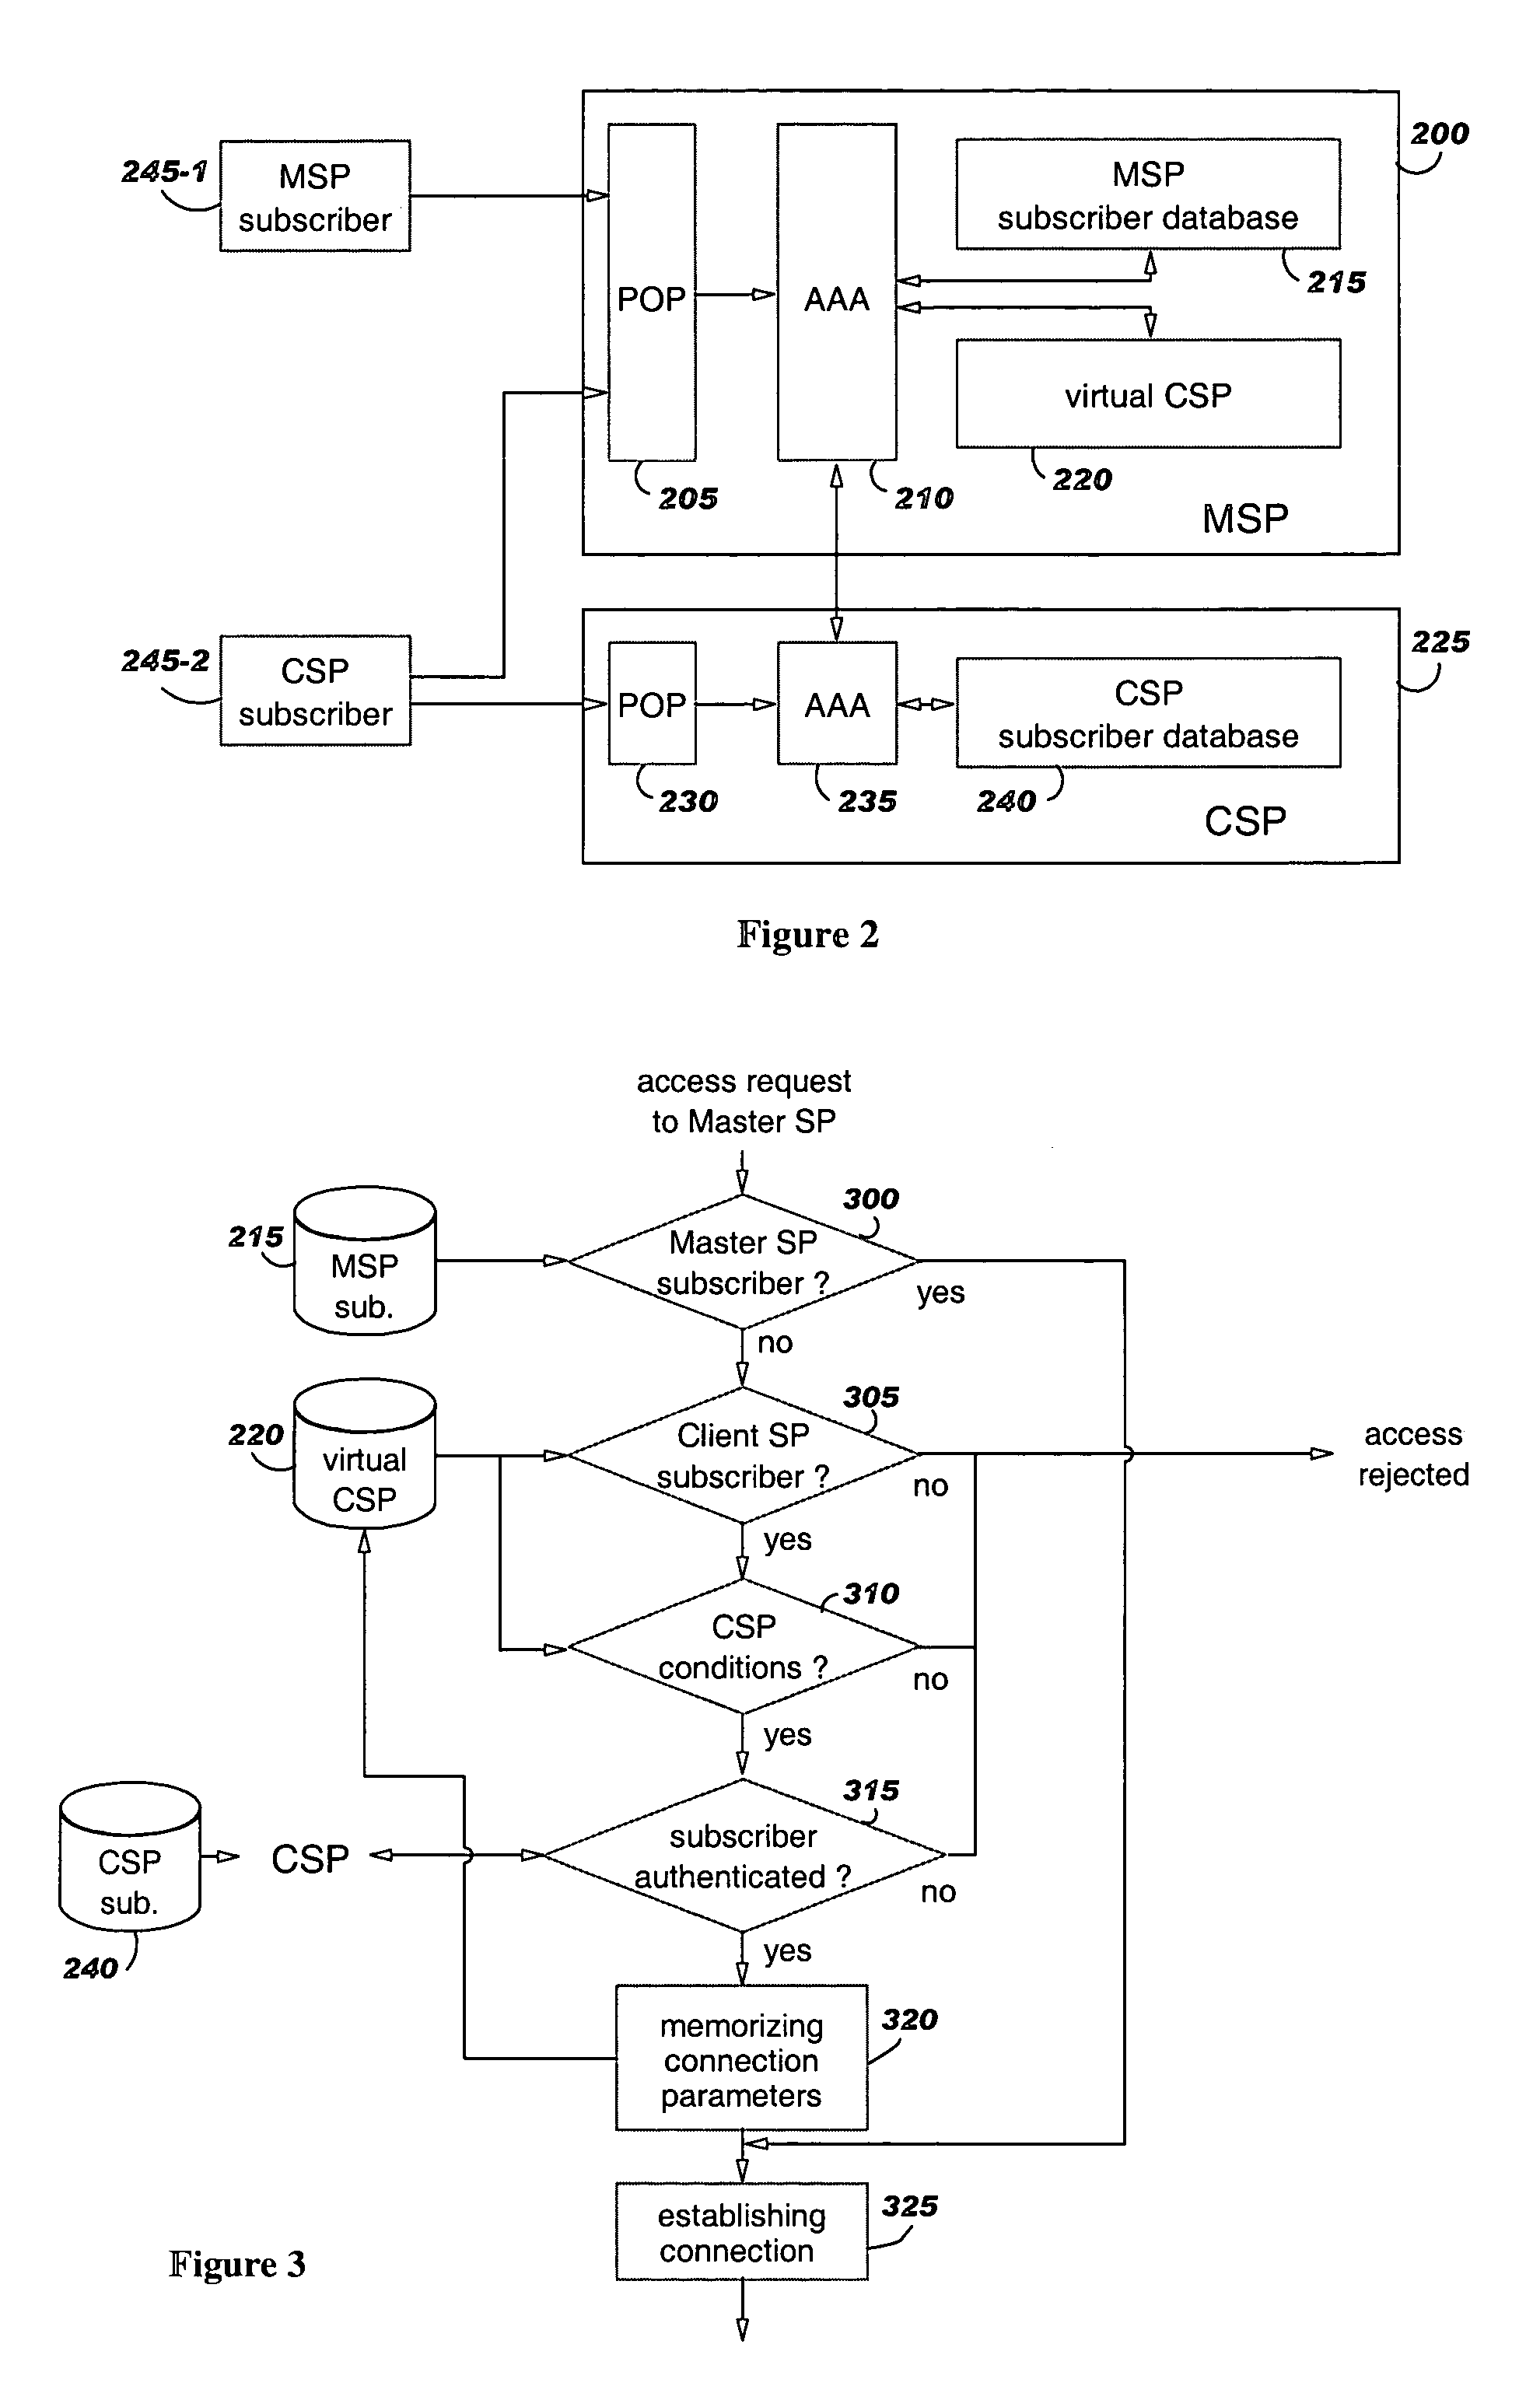 Method and systems for sharing network access capacities across internet service providers